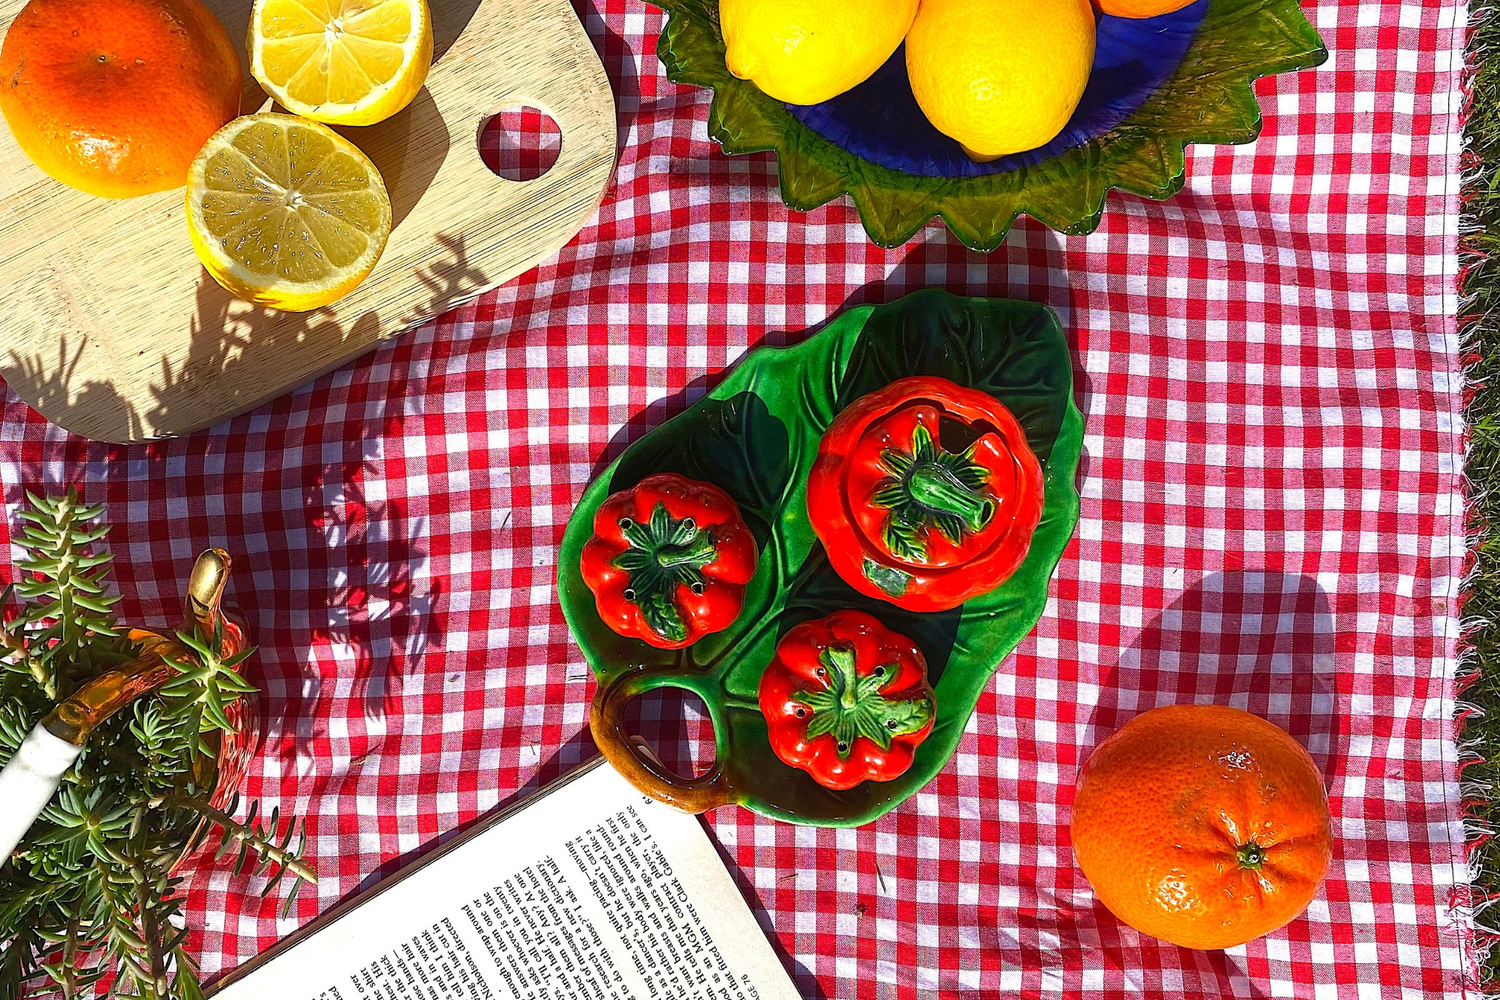 tomato shaped salt and pepper shakers viewed from above on a gingham picnic cloth